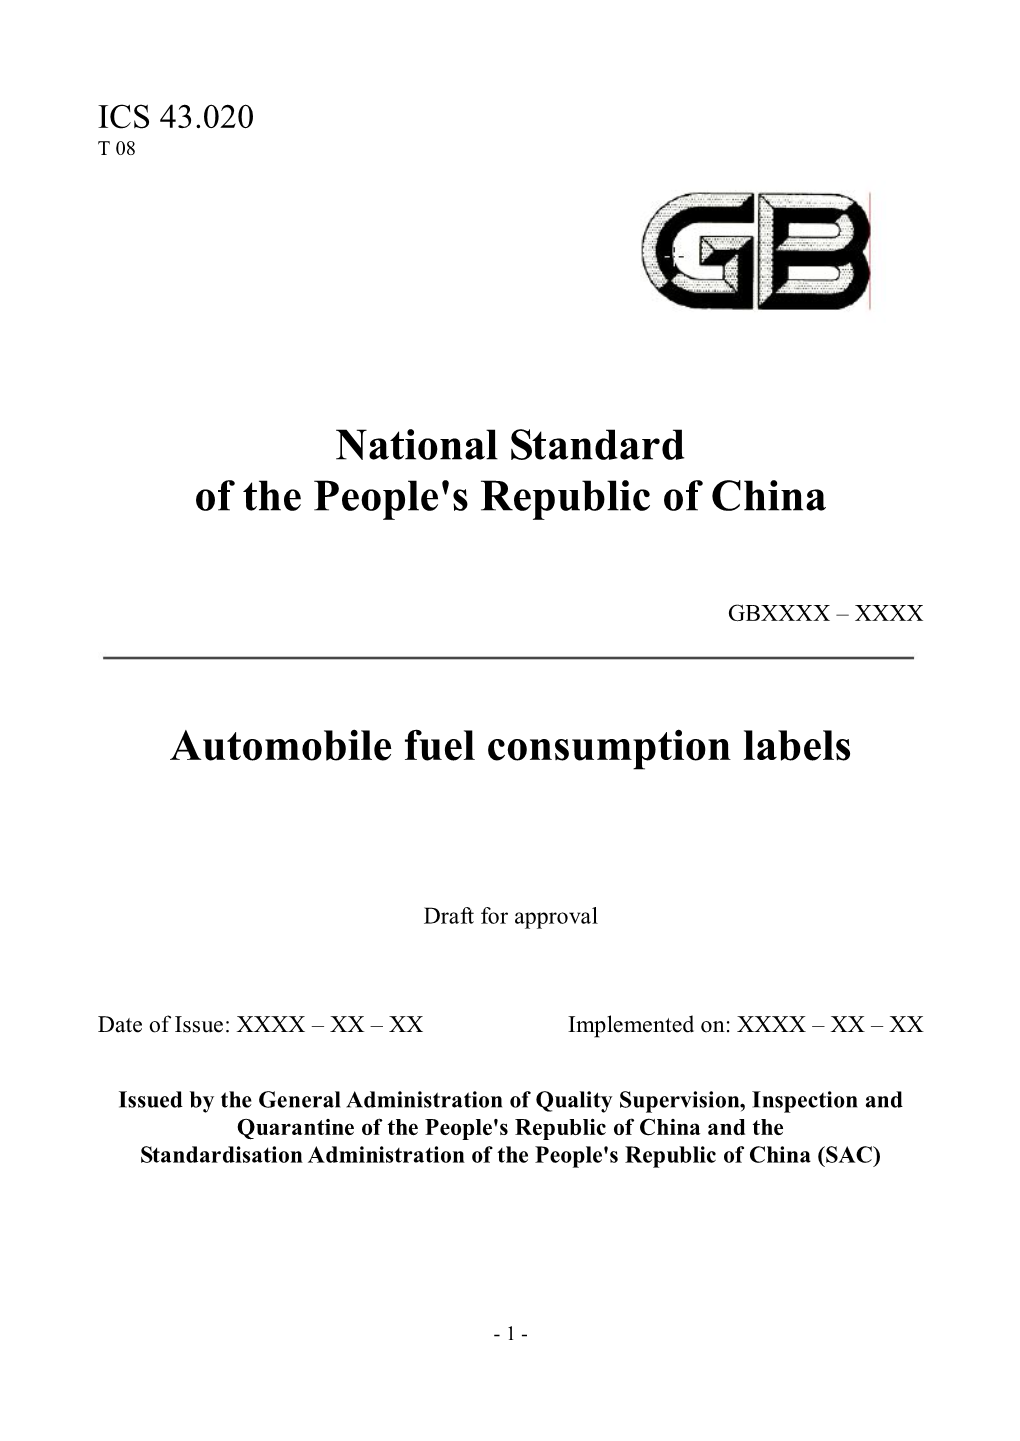 National Standard of the People's Republic of China Automobile Fuel